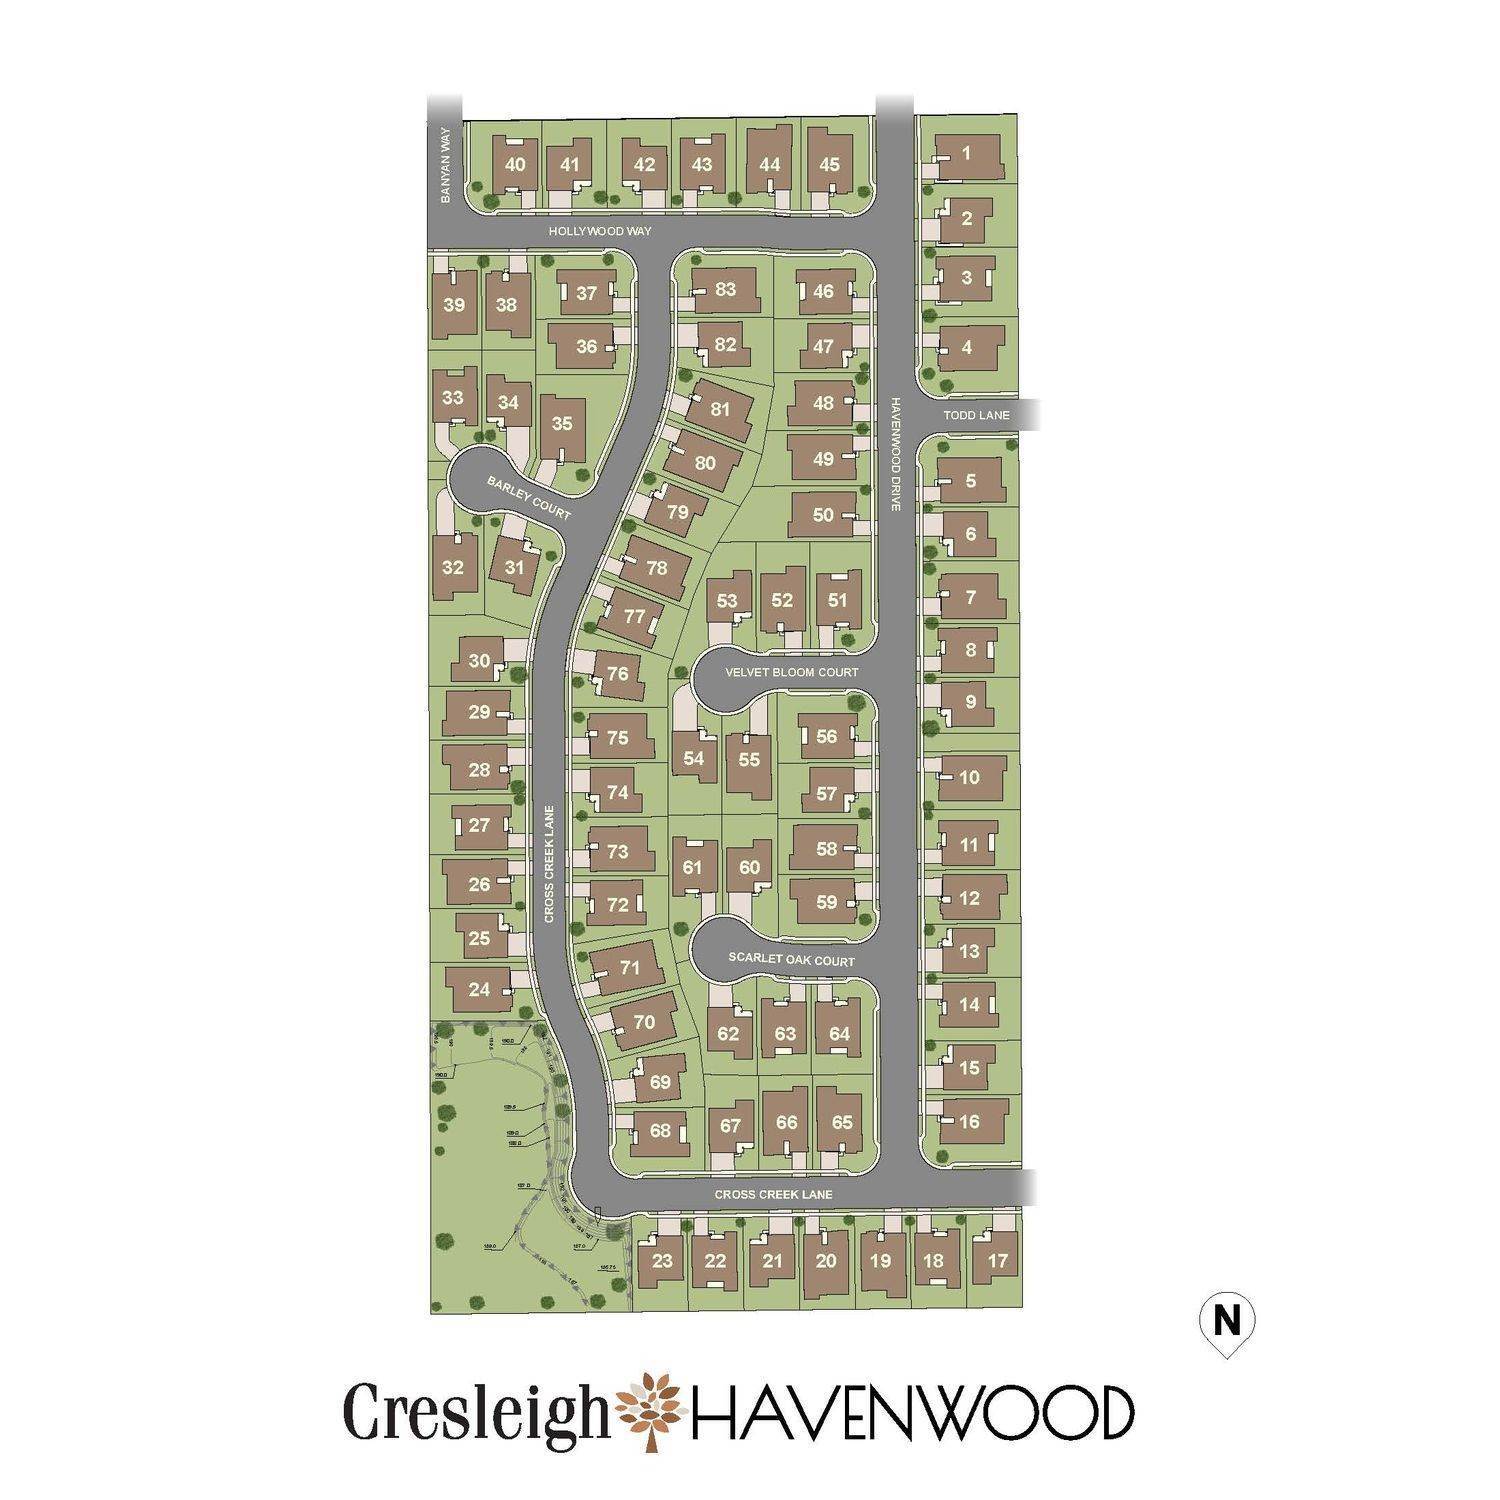 2. Cresleigh Havenwood xây dựng tại 758 Havenwood Drive, Lincoln, CA 95648